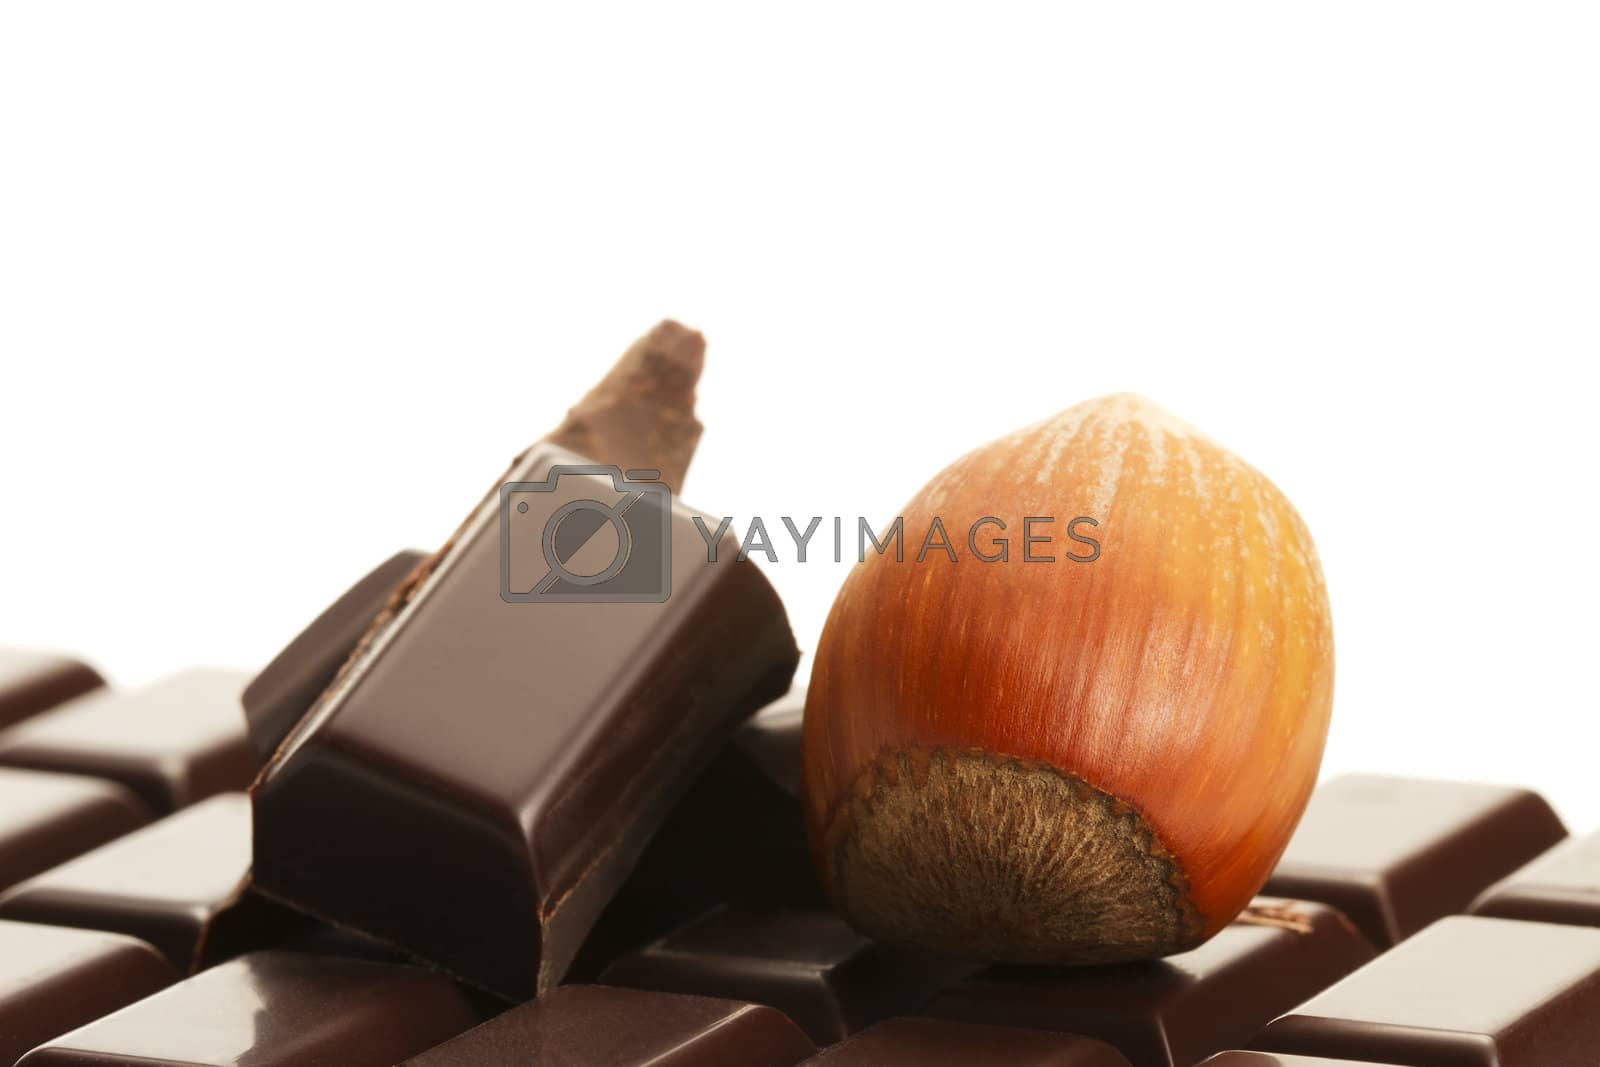 Royalty free image of hazelnut and chocolate pieces on a plain chocolate bar by RobStark